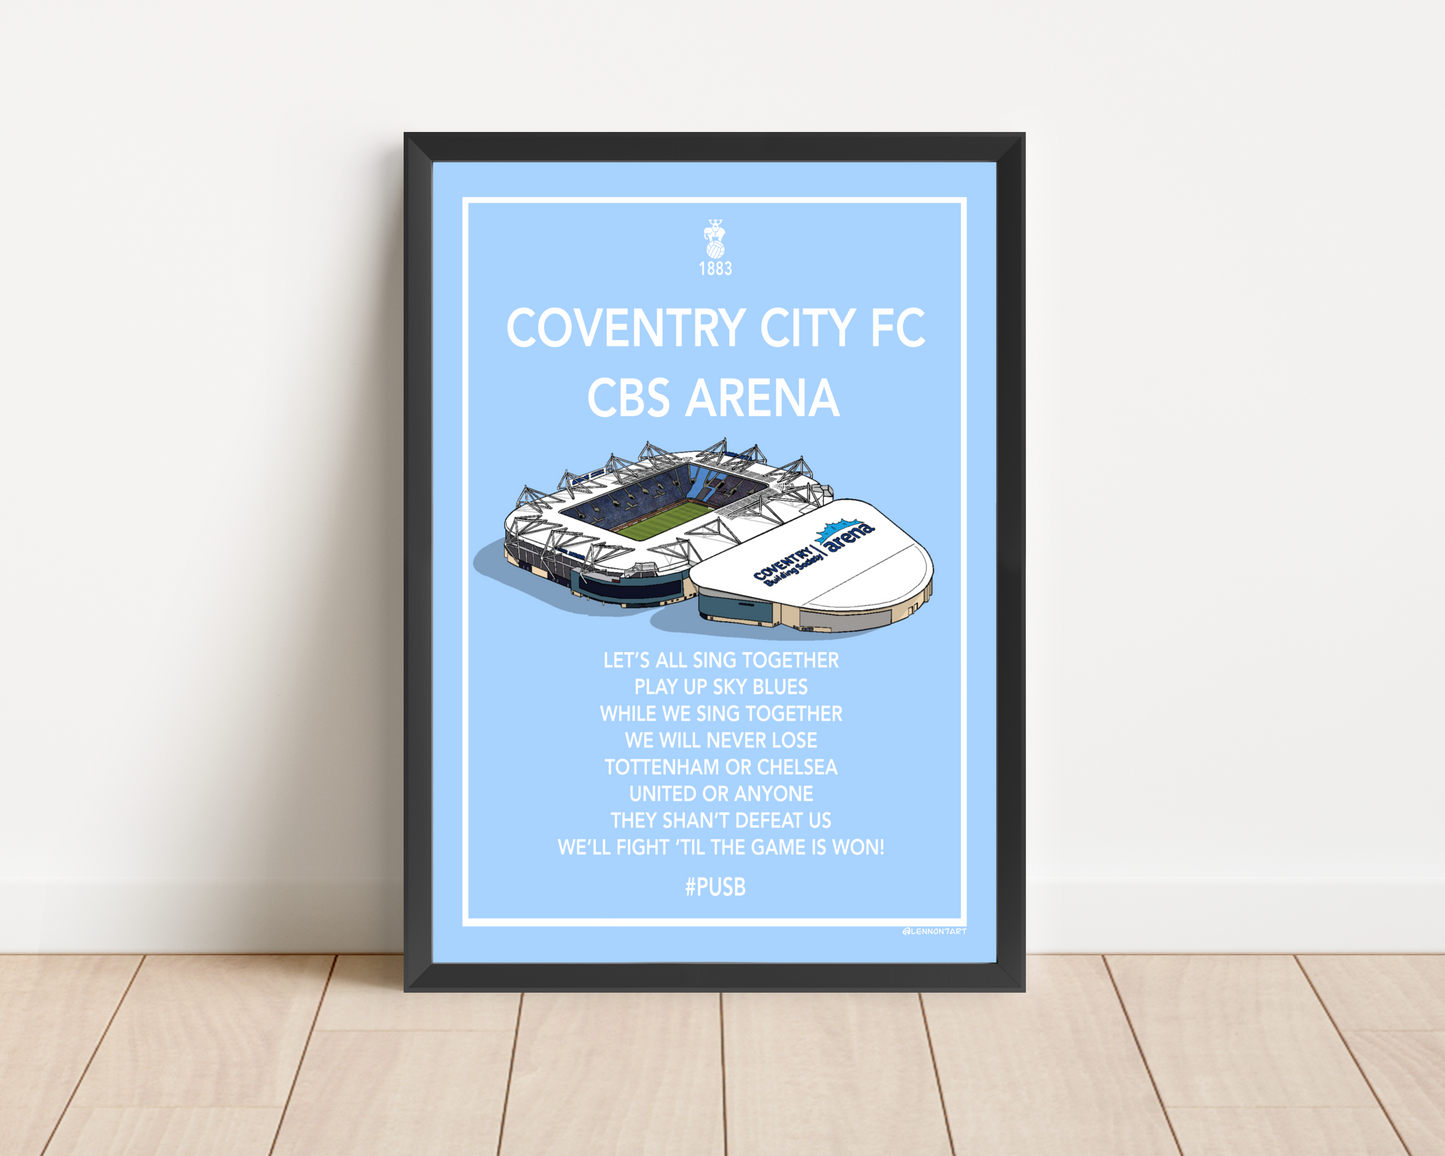 CBS Arena personalised poster